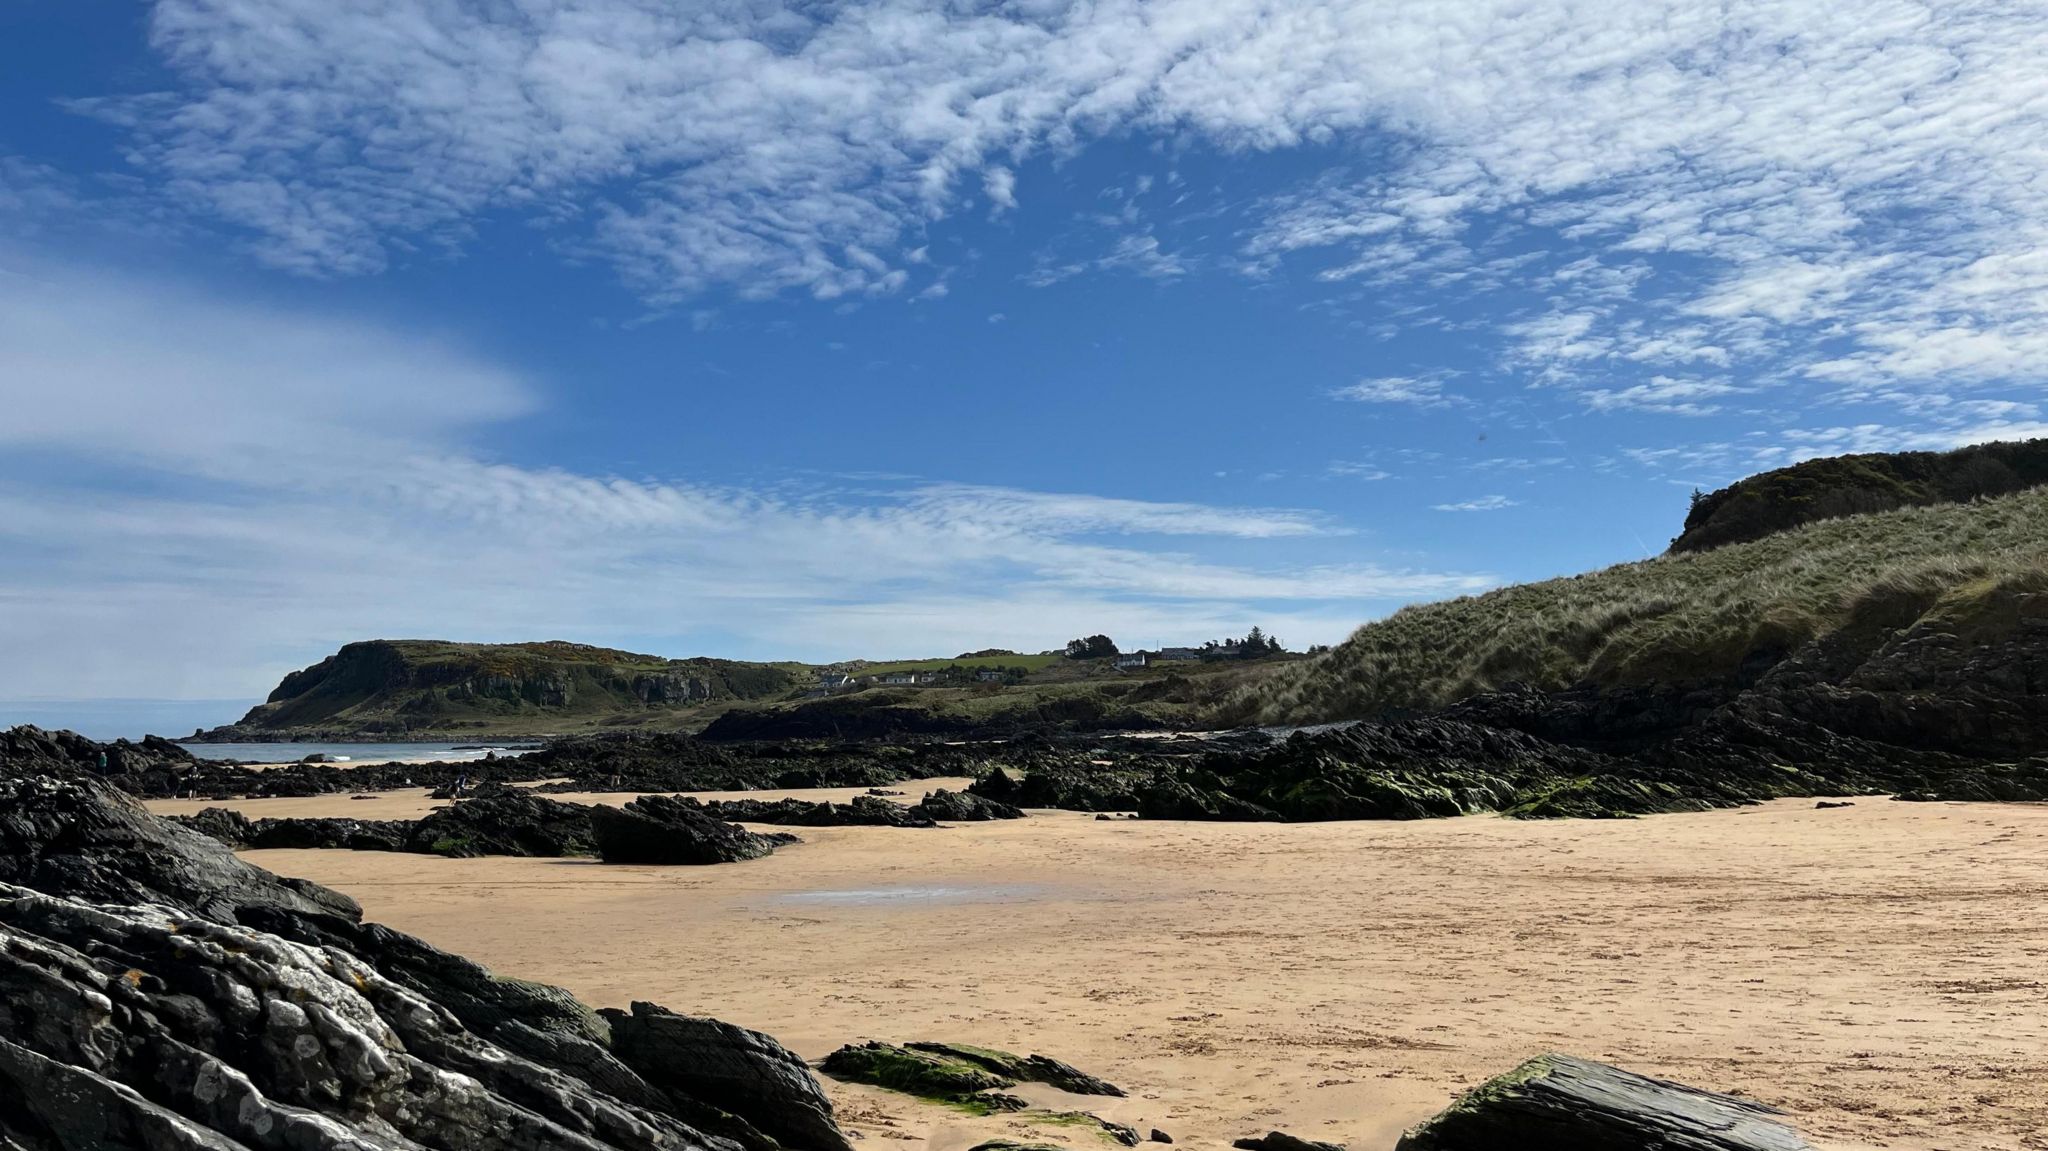 A large beach on a rocky coastline with the tide well out, and thin cloud in a blue sky above